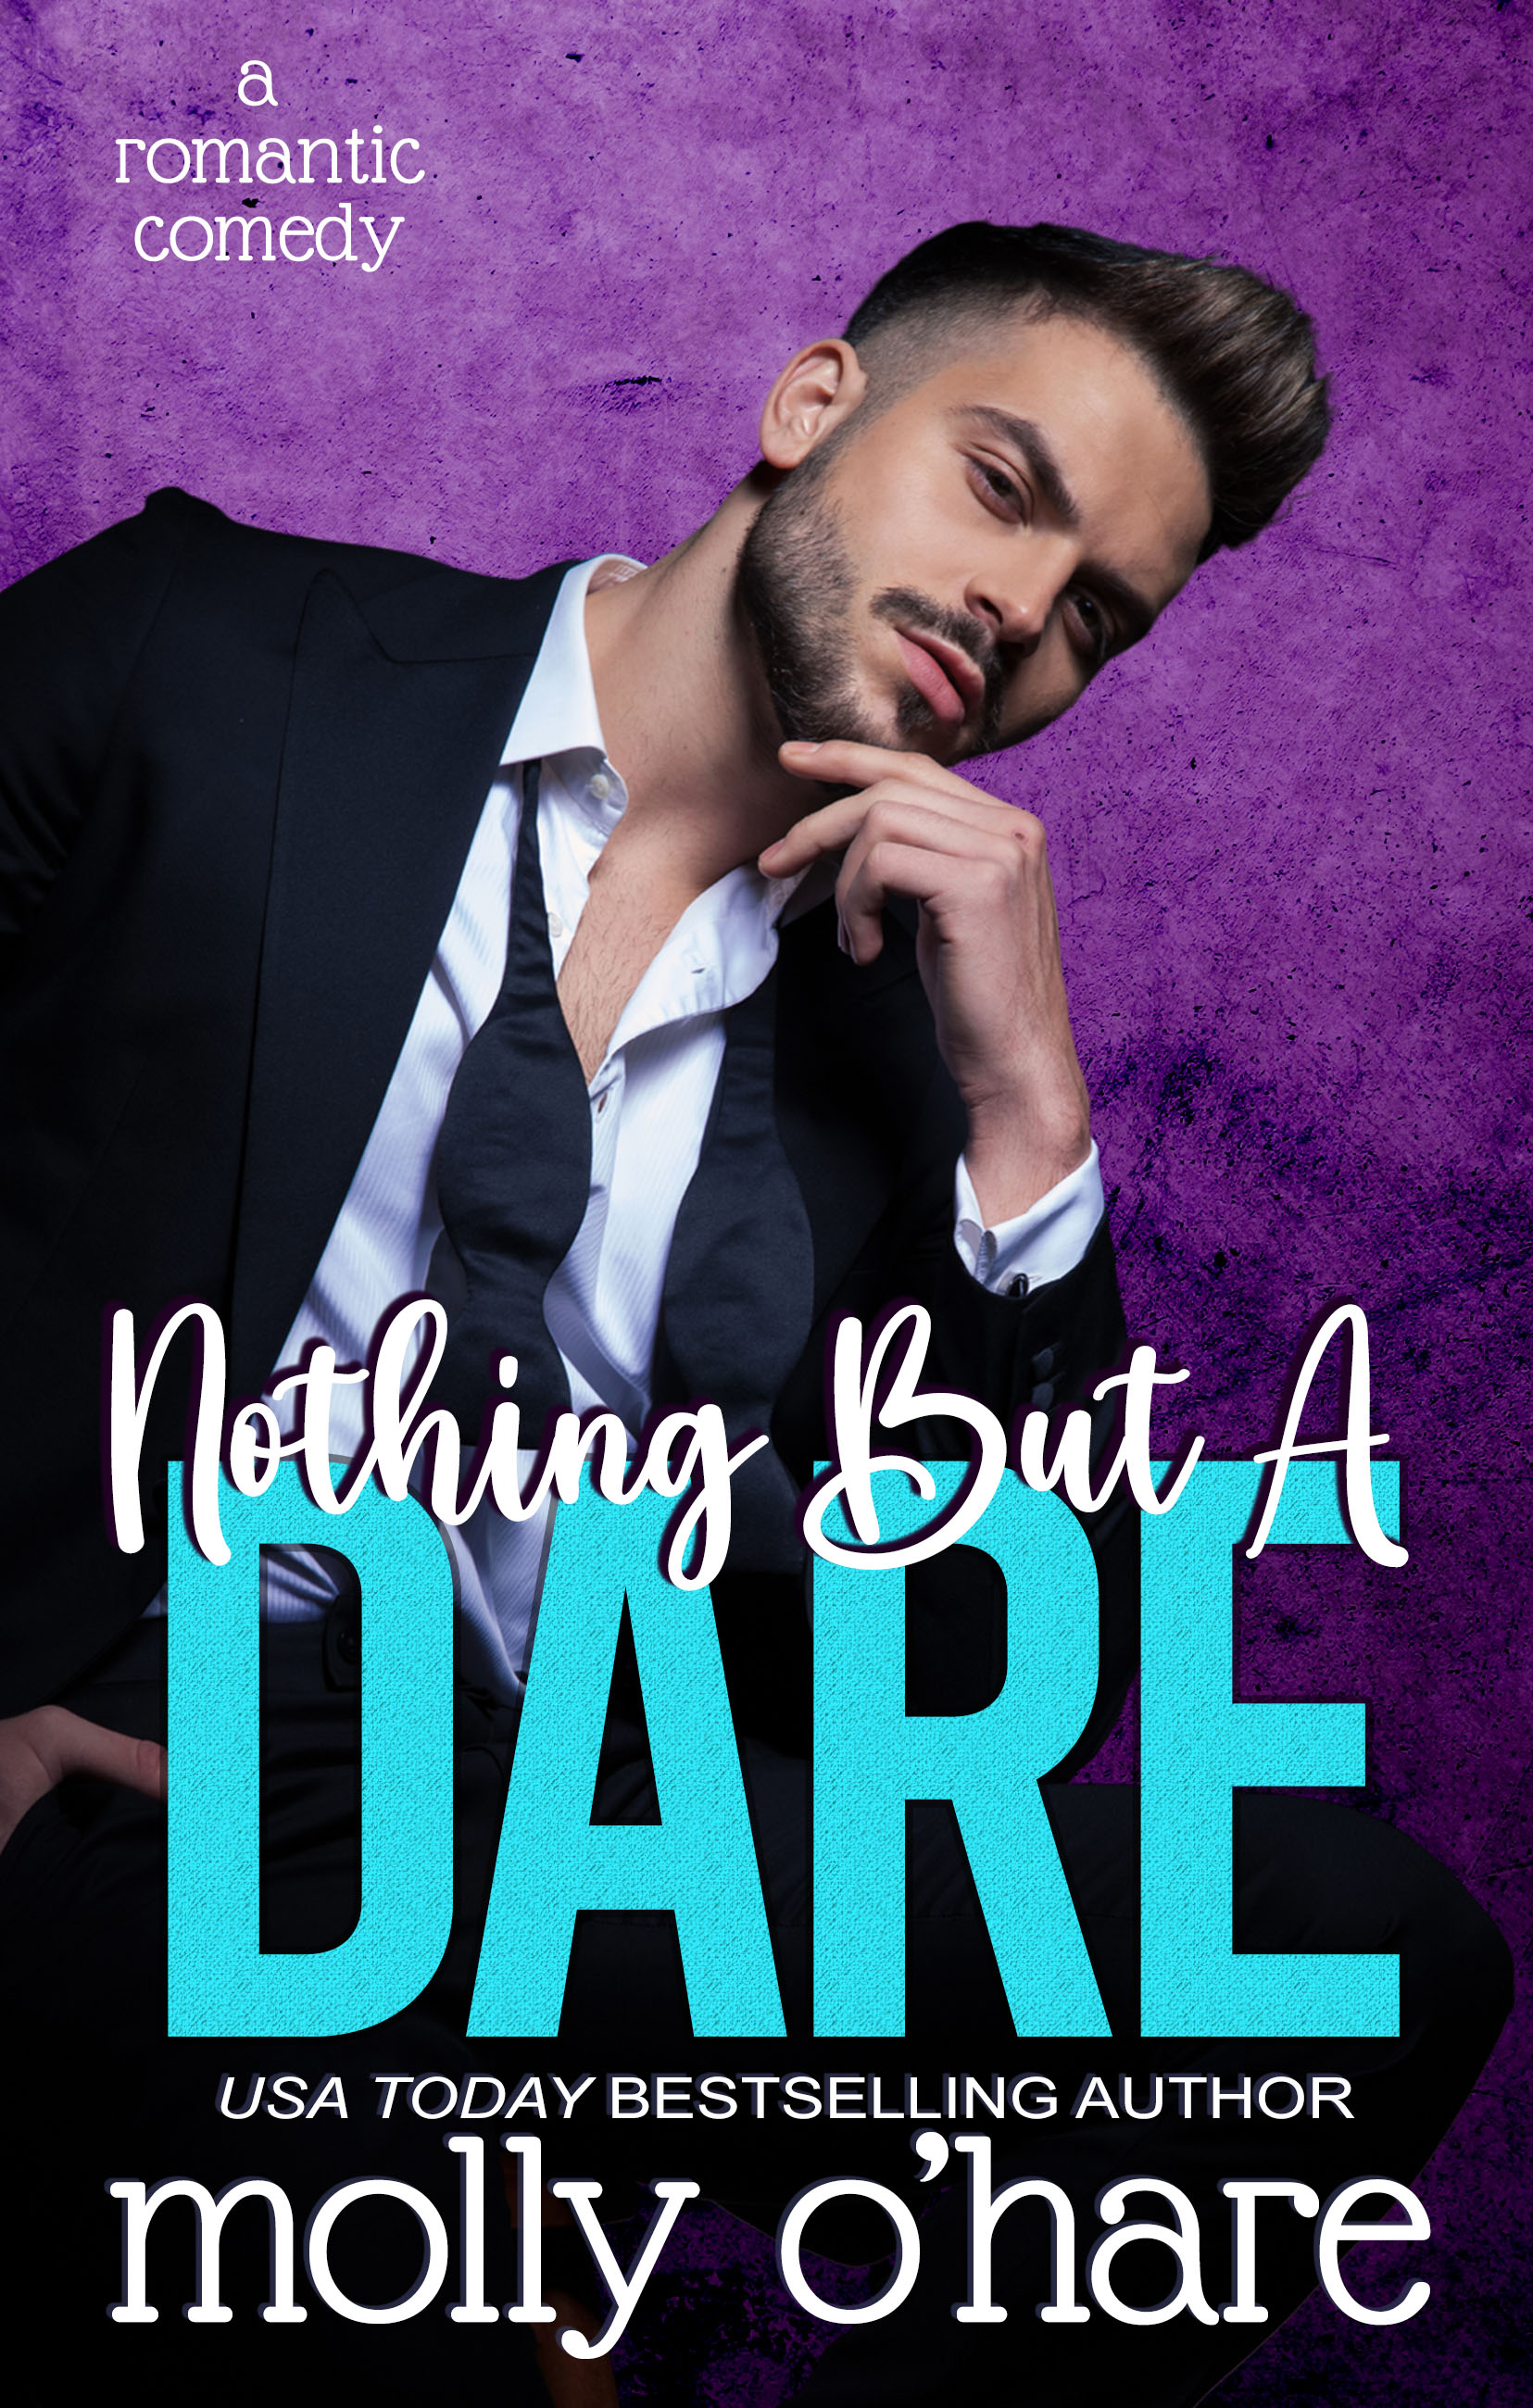 cody heidleberg recommends Dare Taylor Naked